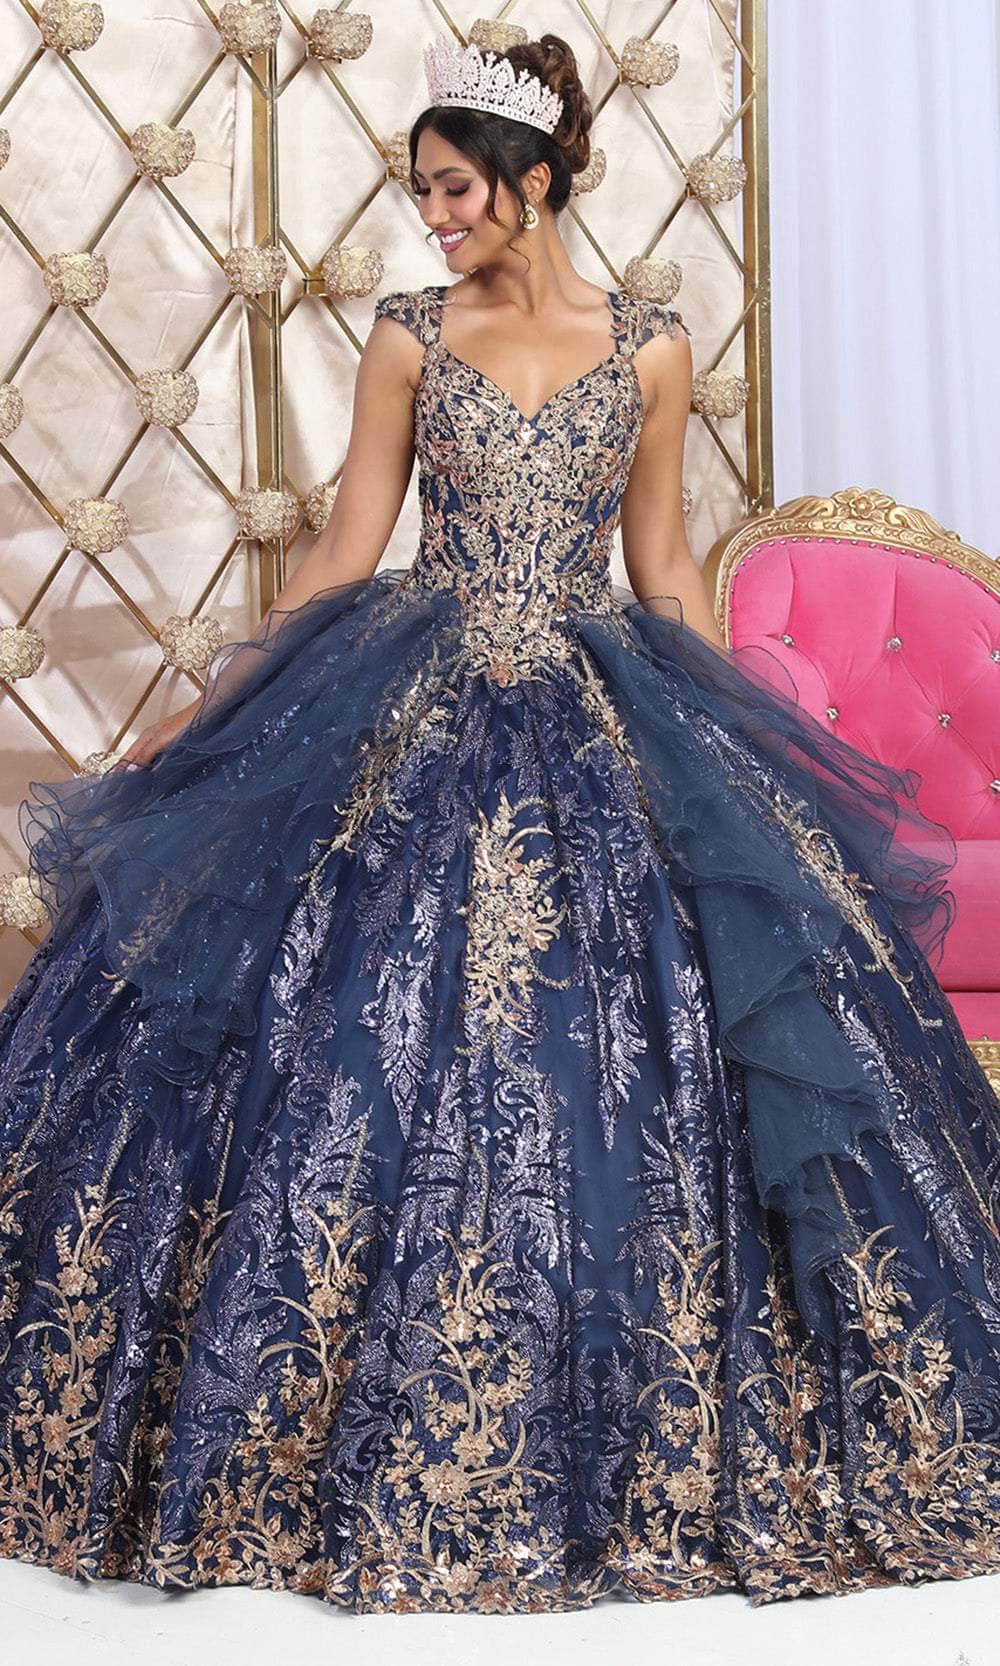 May Queen LK231 - Metallic Embroidered Ballgown Quinceanera Dresses 4 / Navy/Gold